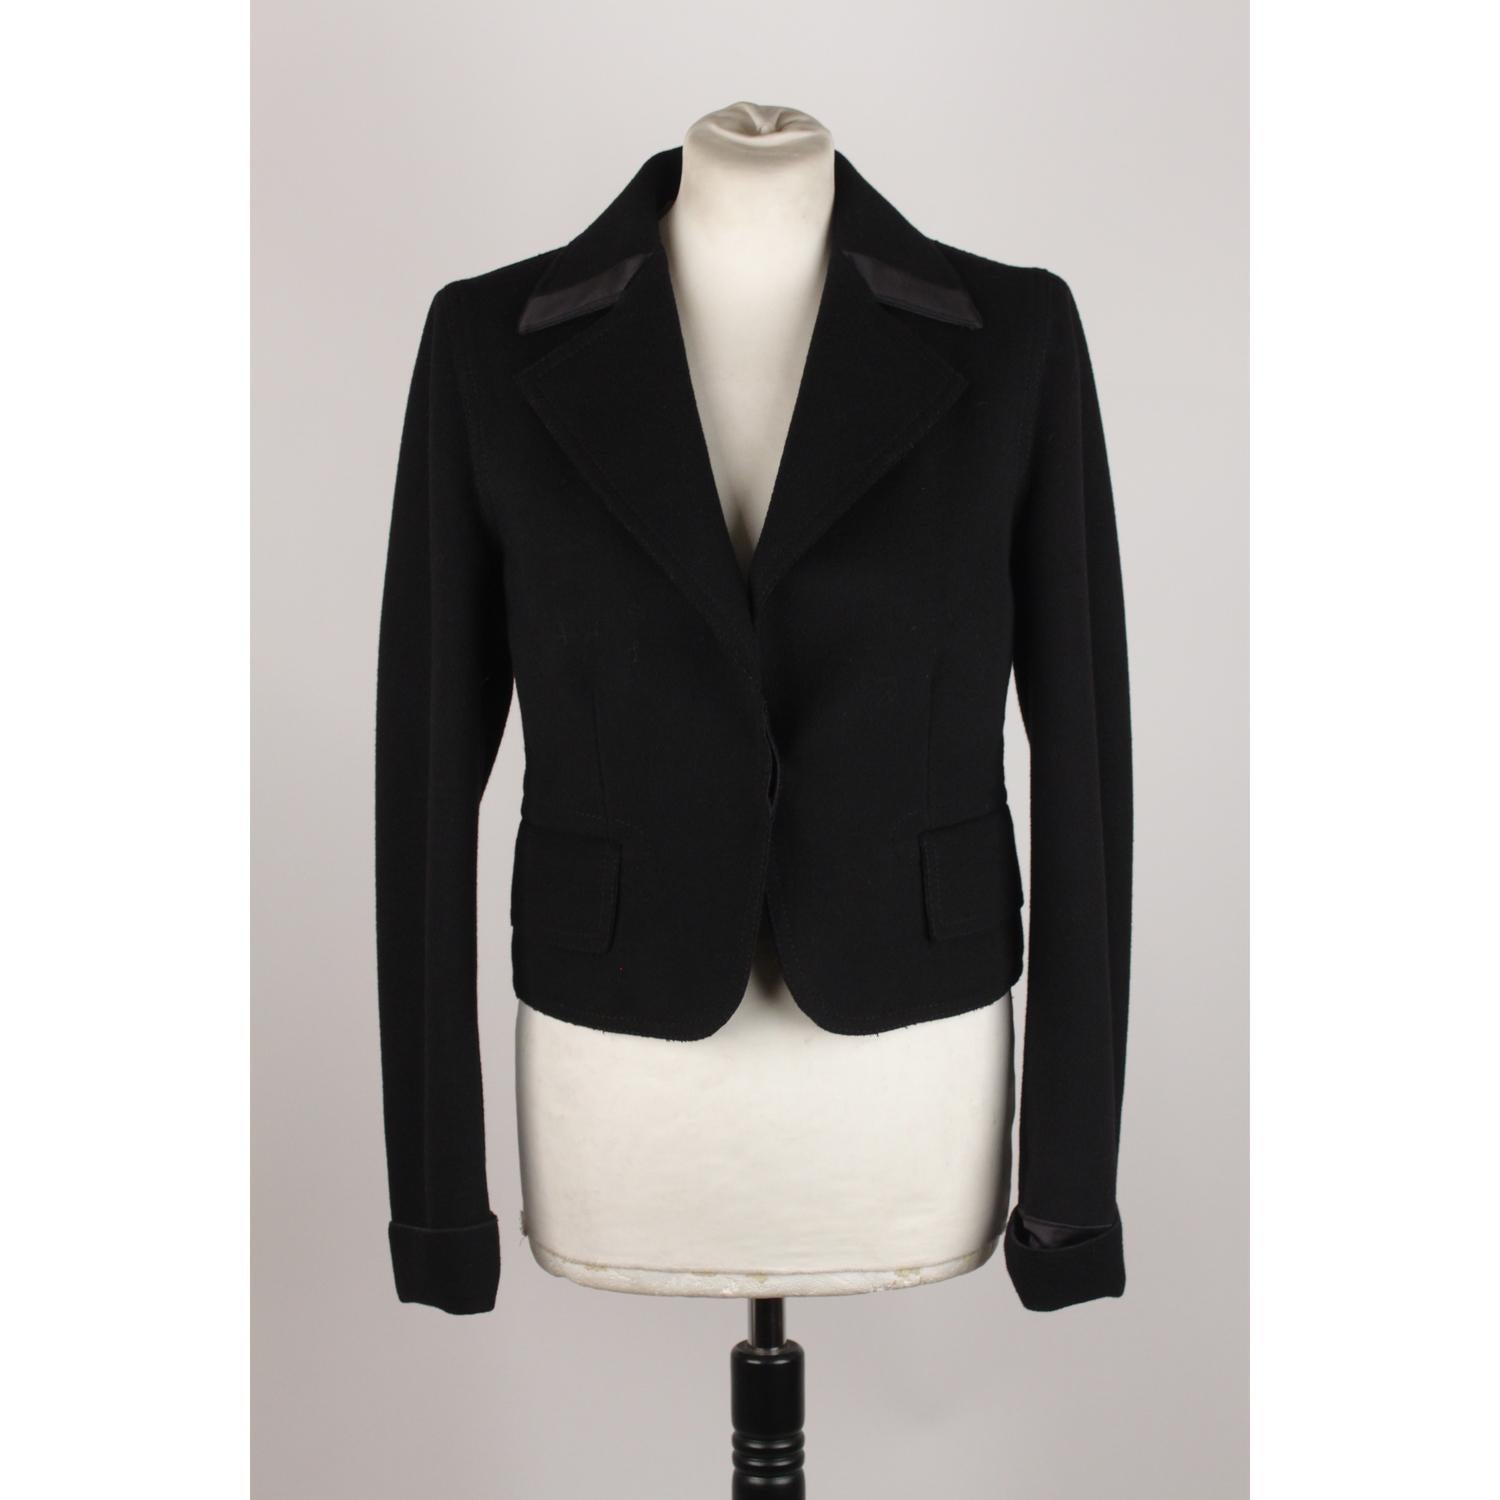 Single breasted baize blazer by GUCCI in black color. Unlined. Single button closure. Stain lining and inner pockets. Size 42 IT (The size shown for this item is the size indicated by the designer on the label)